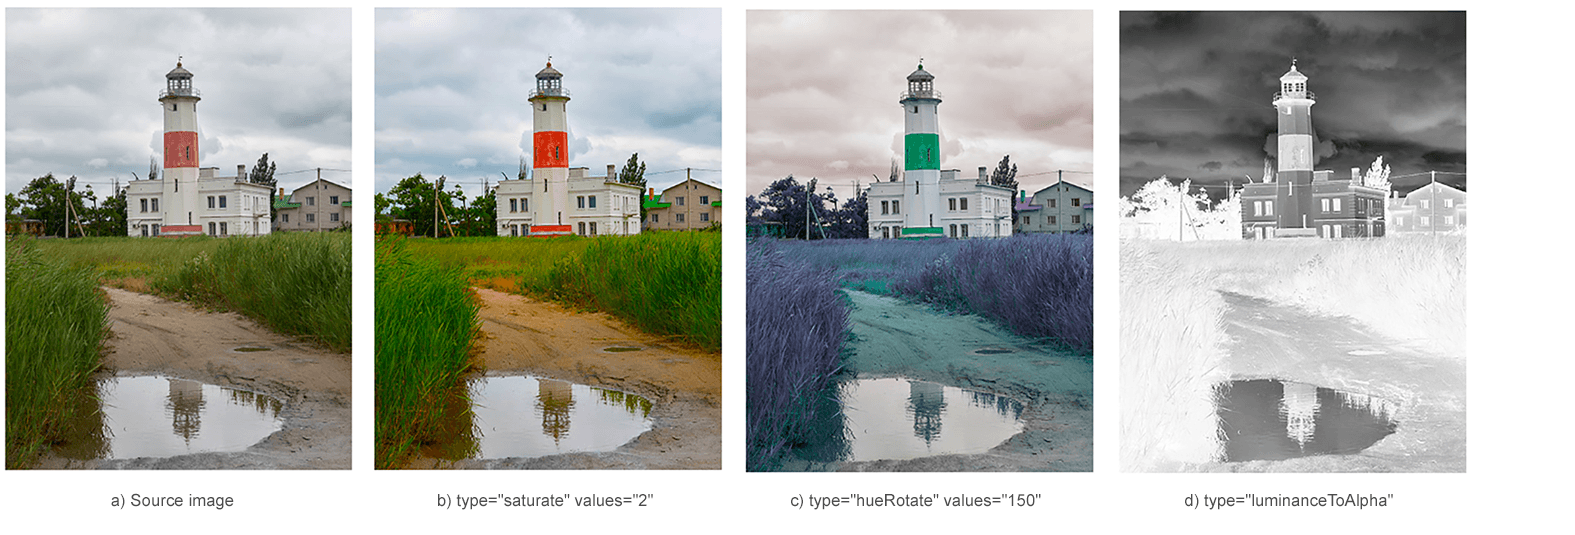 Text “A series of images with various values of the color matrix type attribute - saturate, hueRotate, and luminanceToAlpha.”